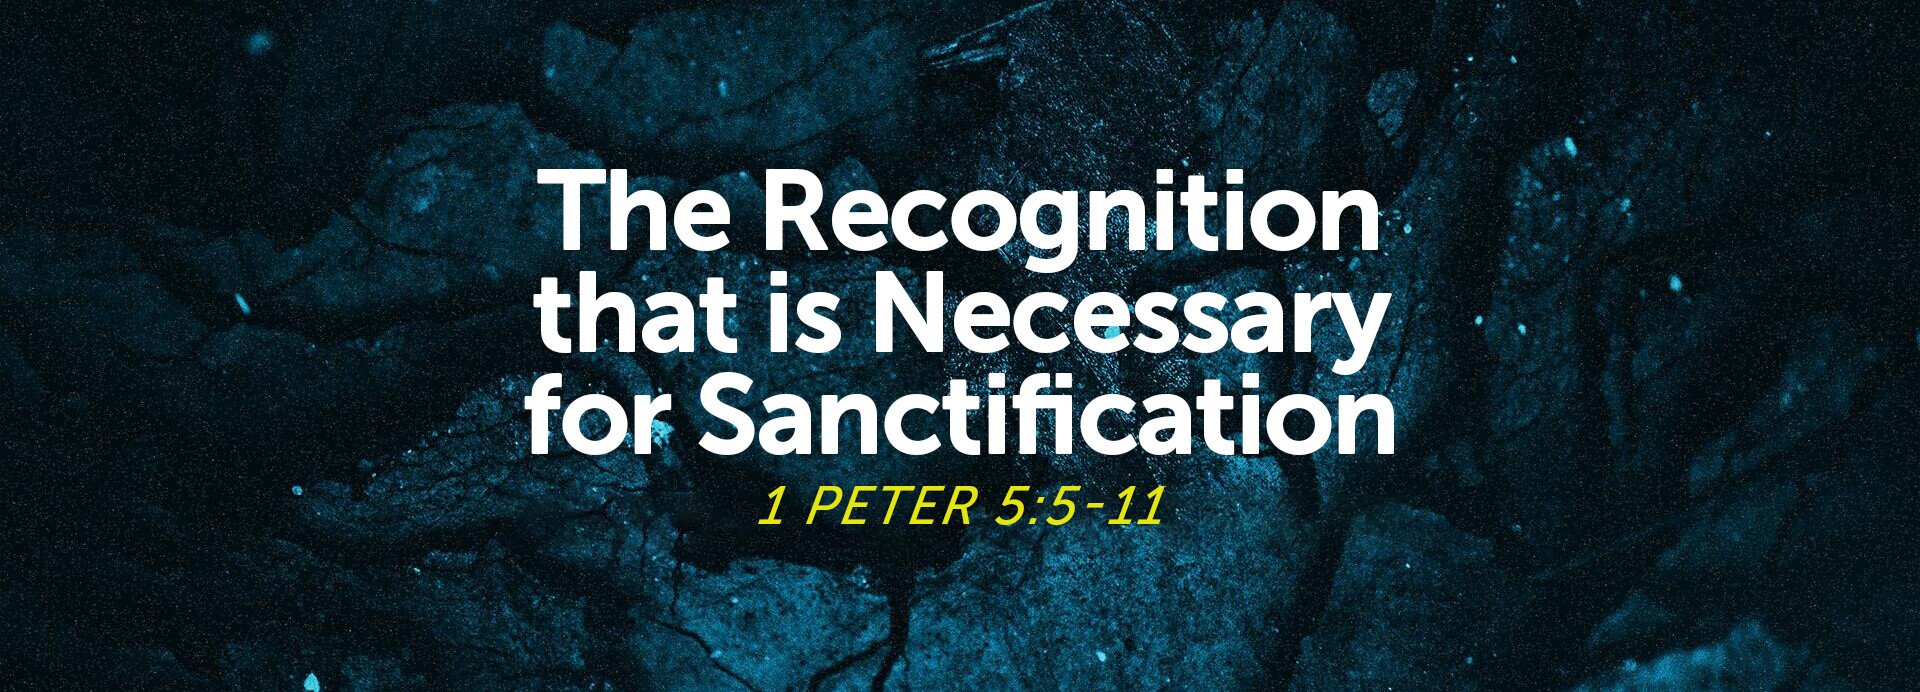 The Recognition That is Necessary for Sanctification